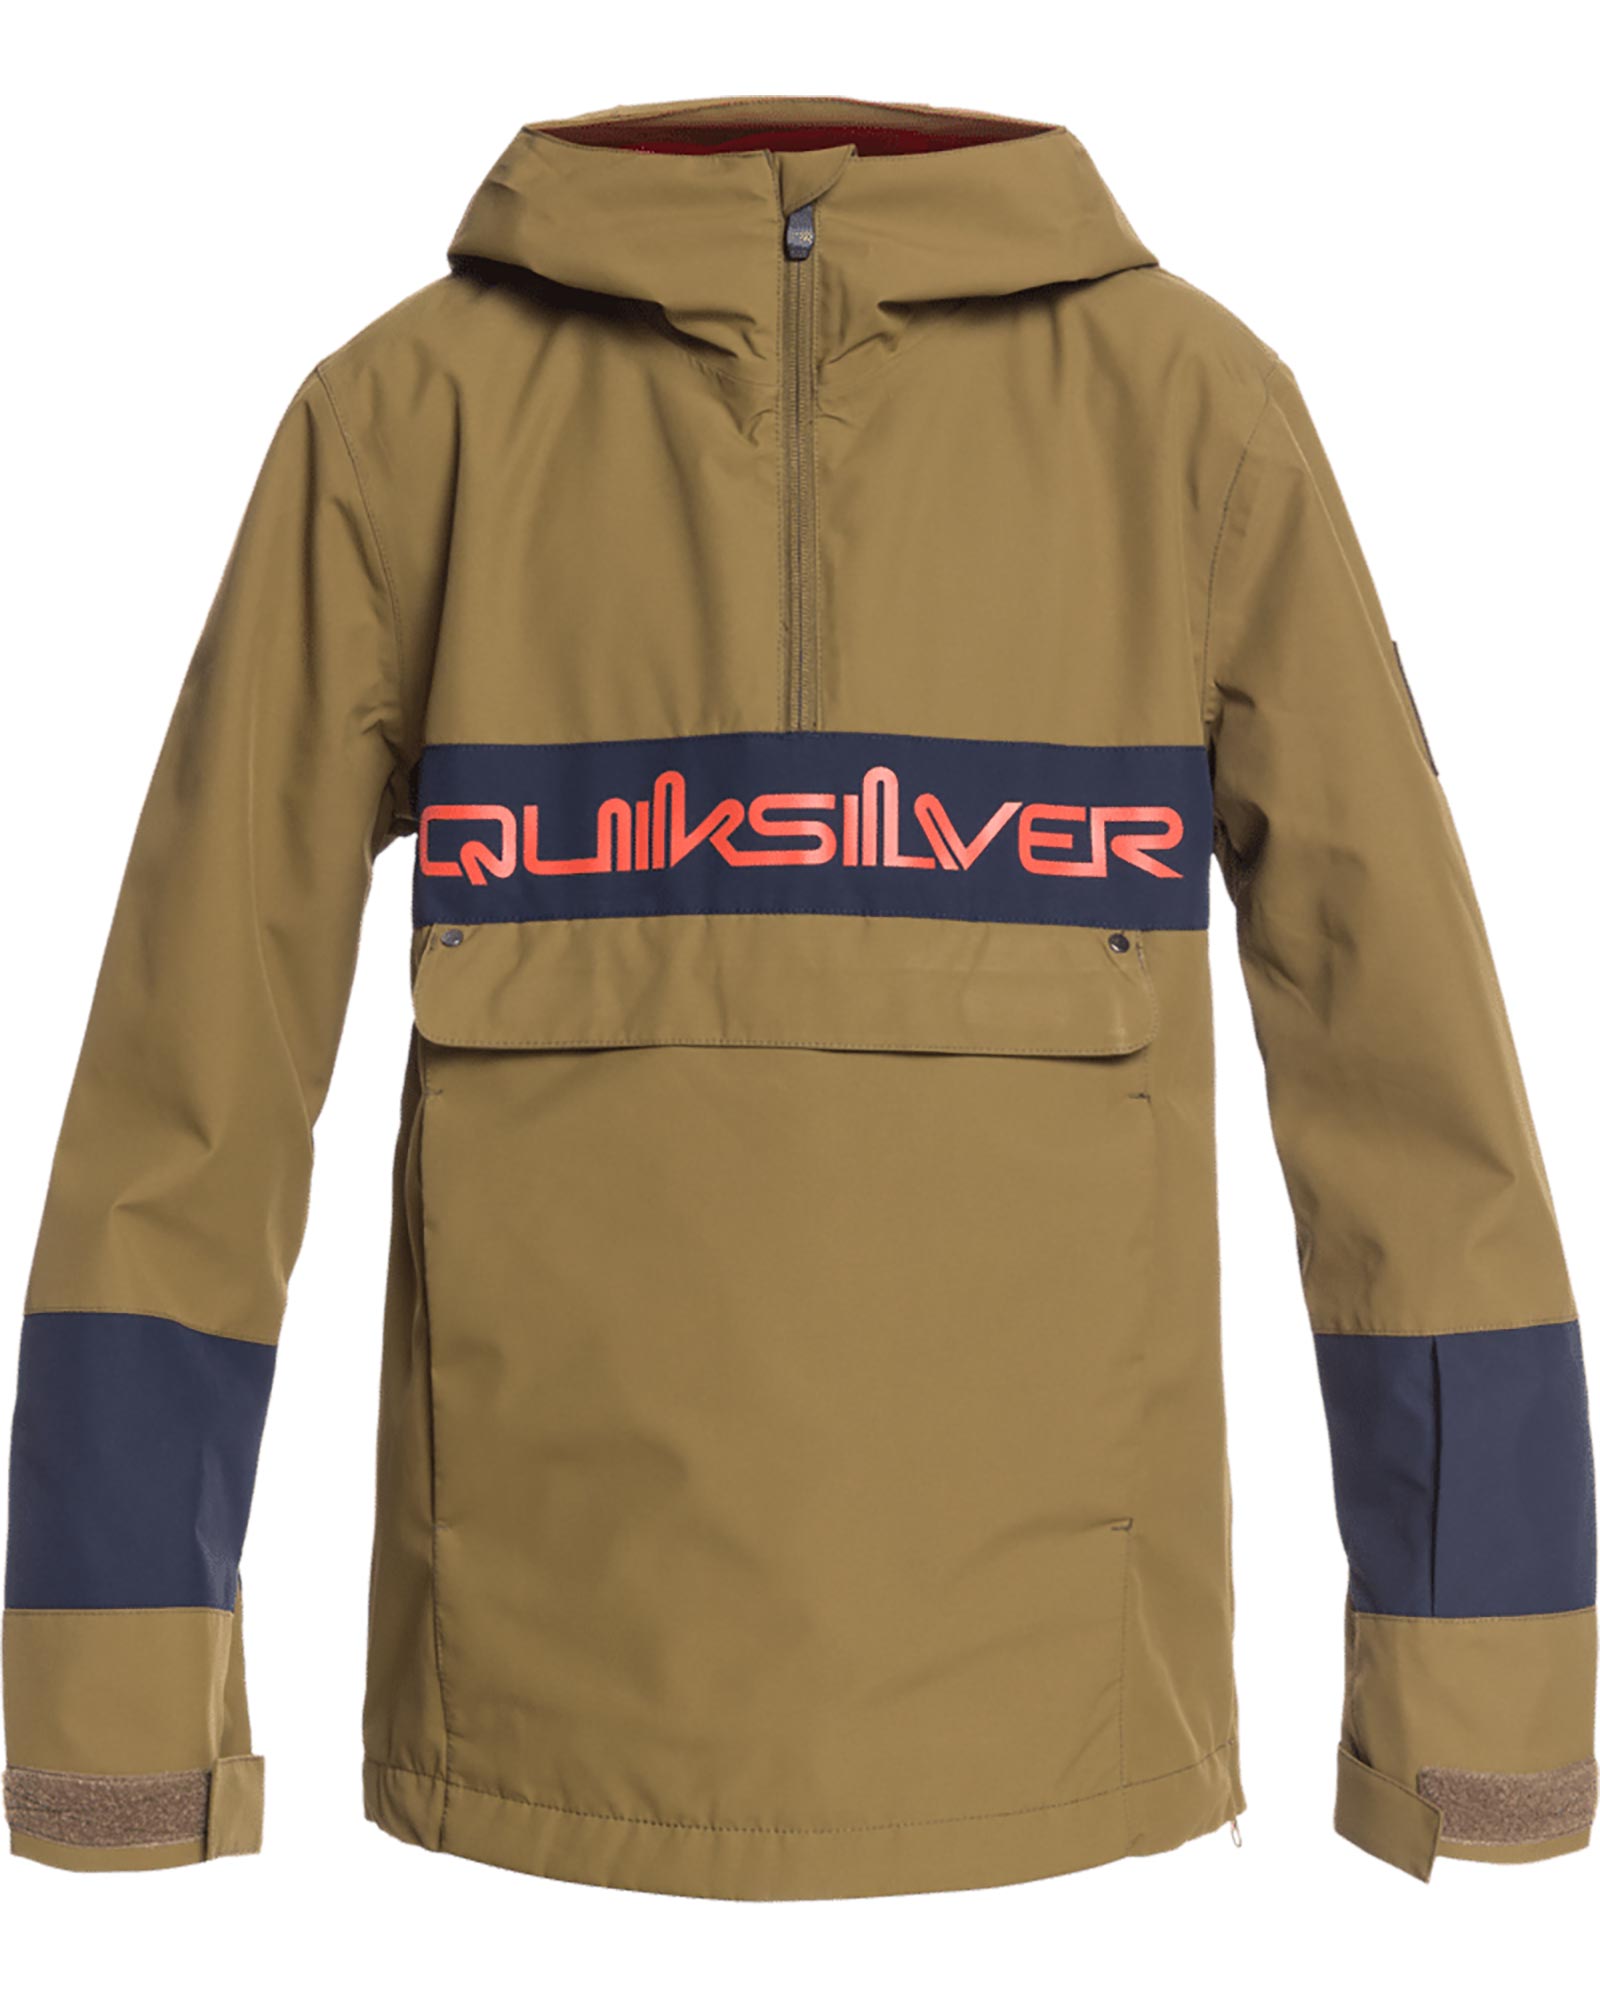 Quiksilver Steeze Boys’ Jacket - Military Olive 12 Years